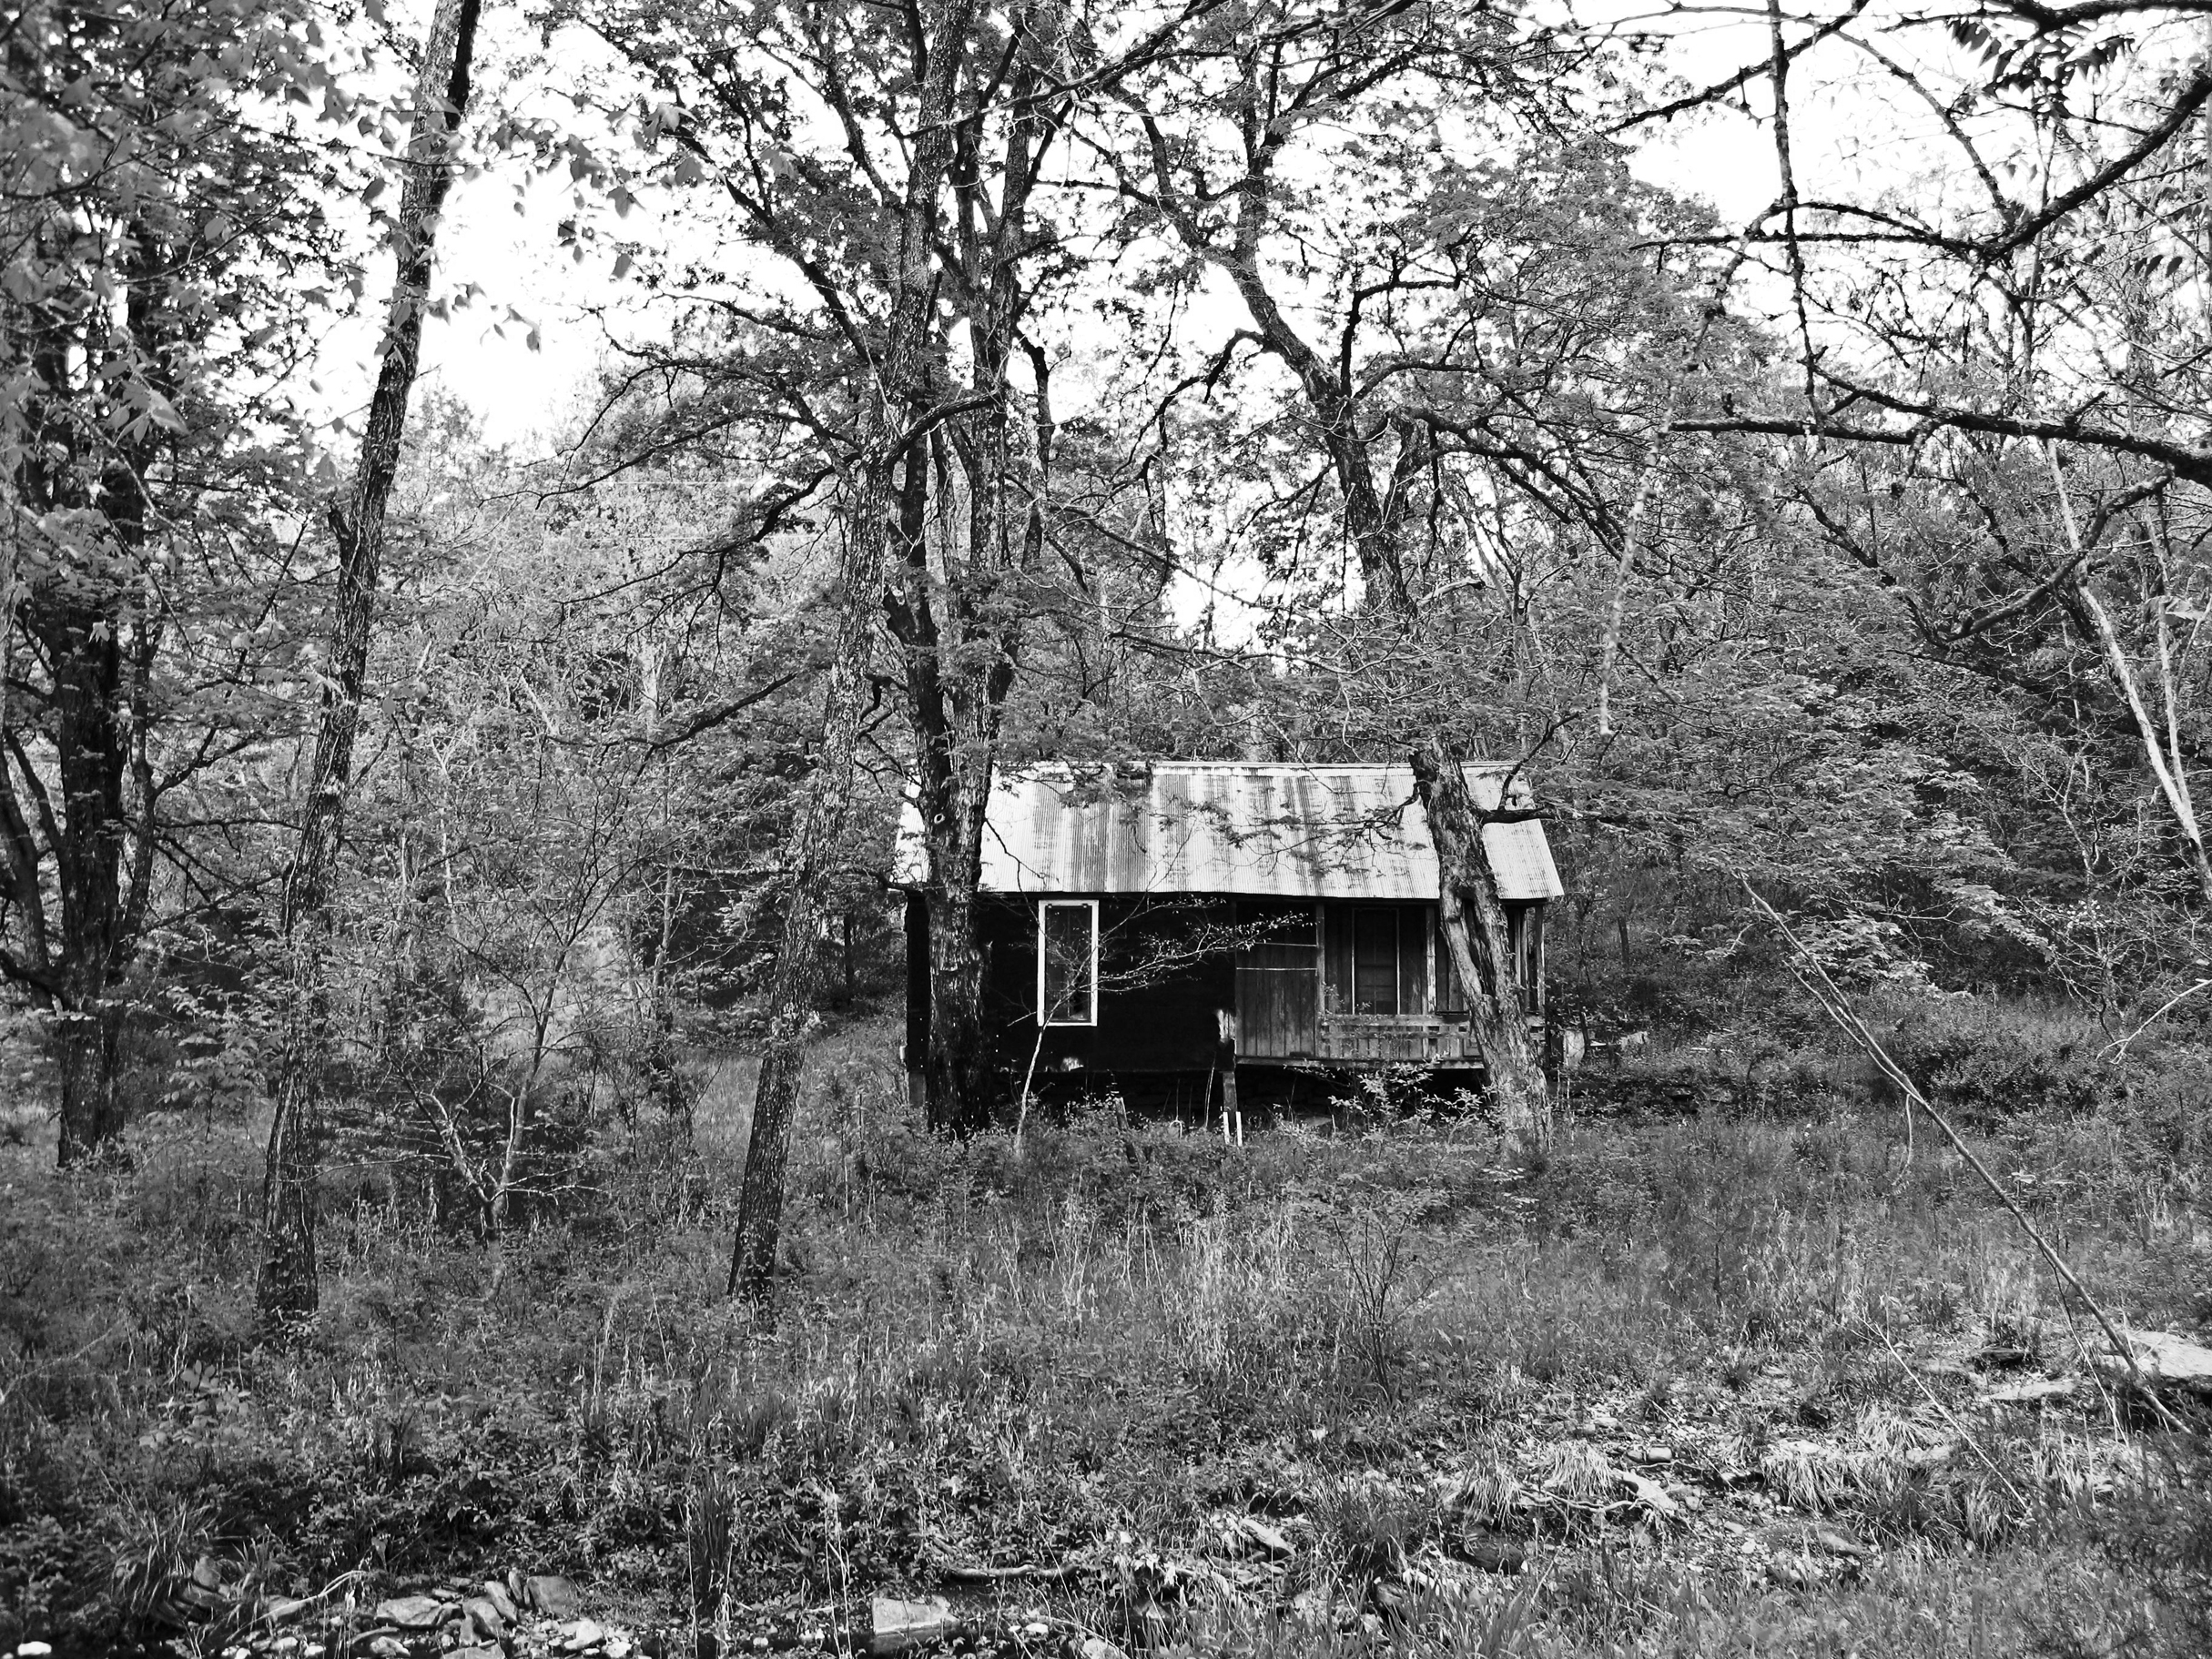    Old Home Place,   Thorney, AR, 2012. B&amp;W HDR digital image. 